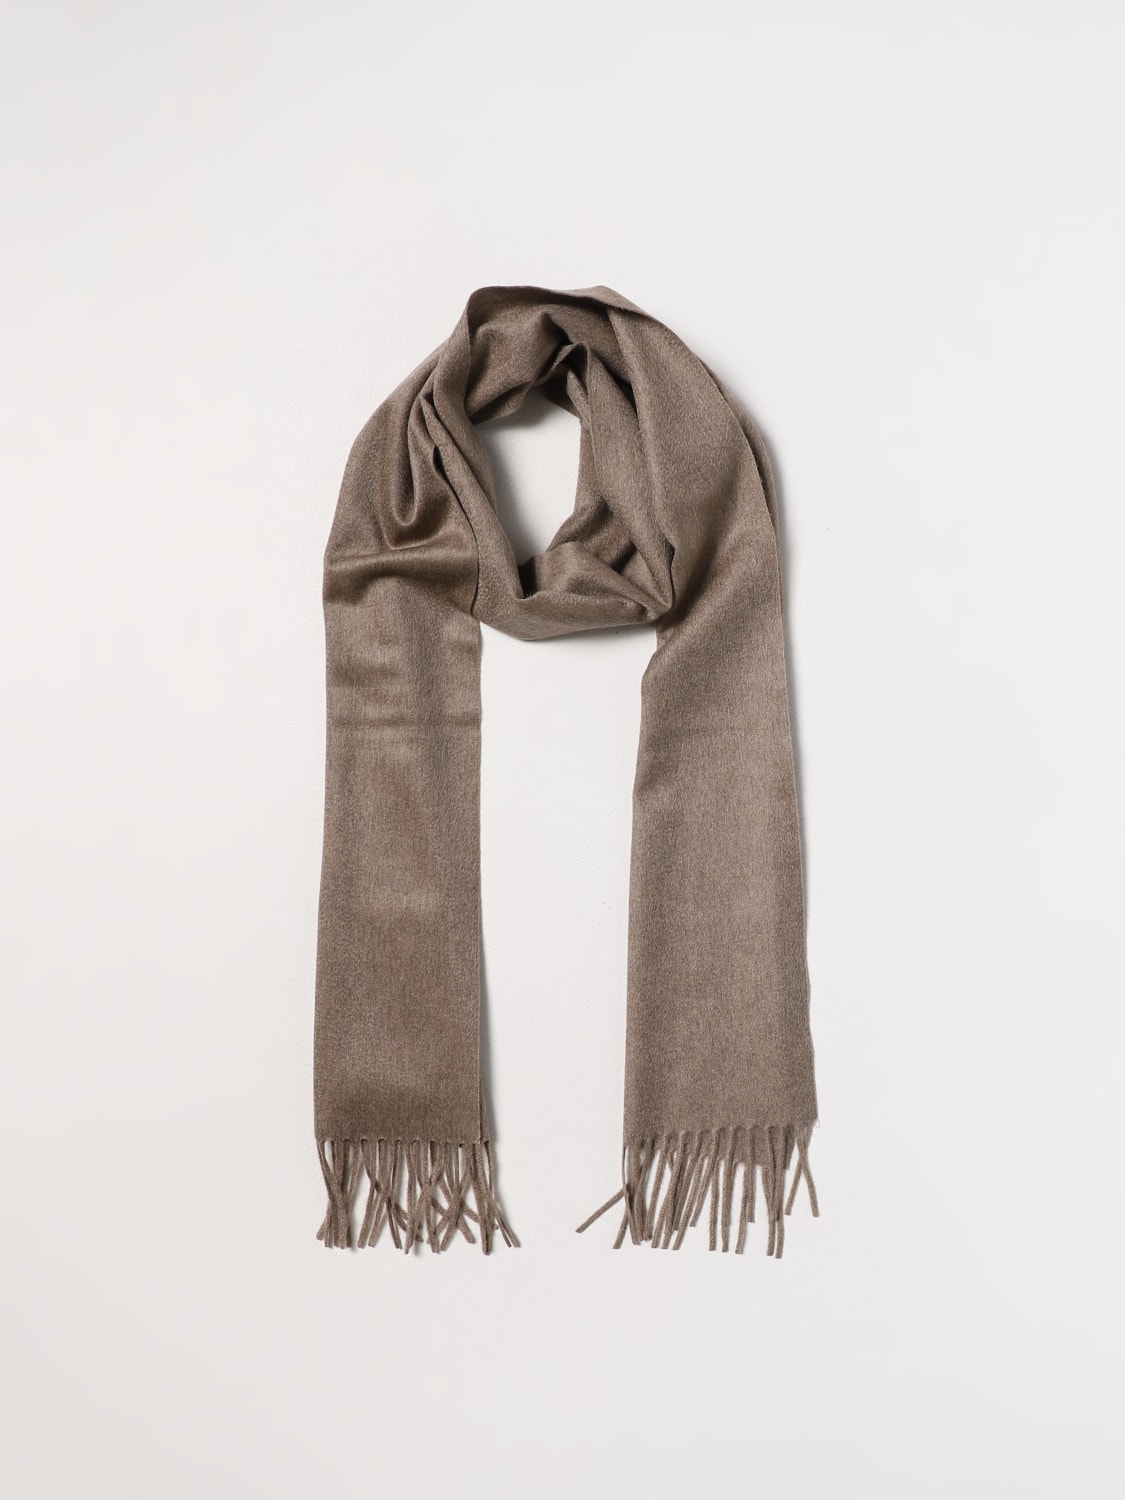 Max Mara Cashmere Scarf with Embroidered Monogram